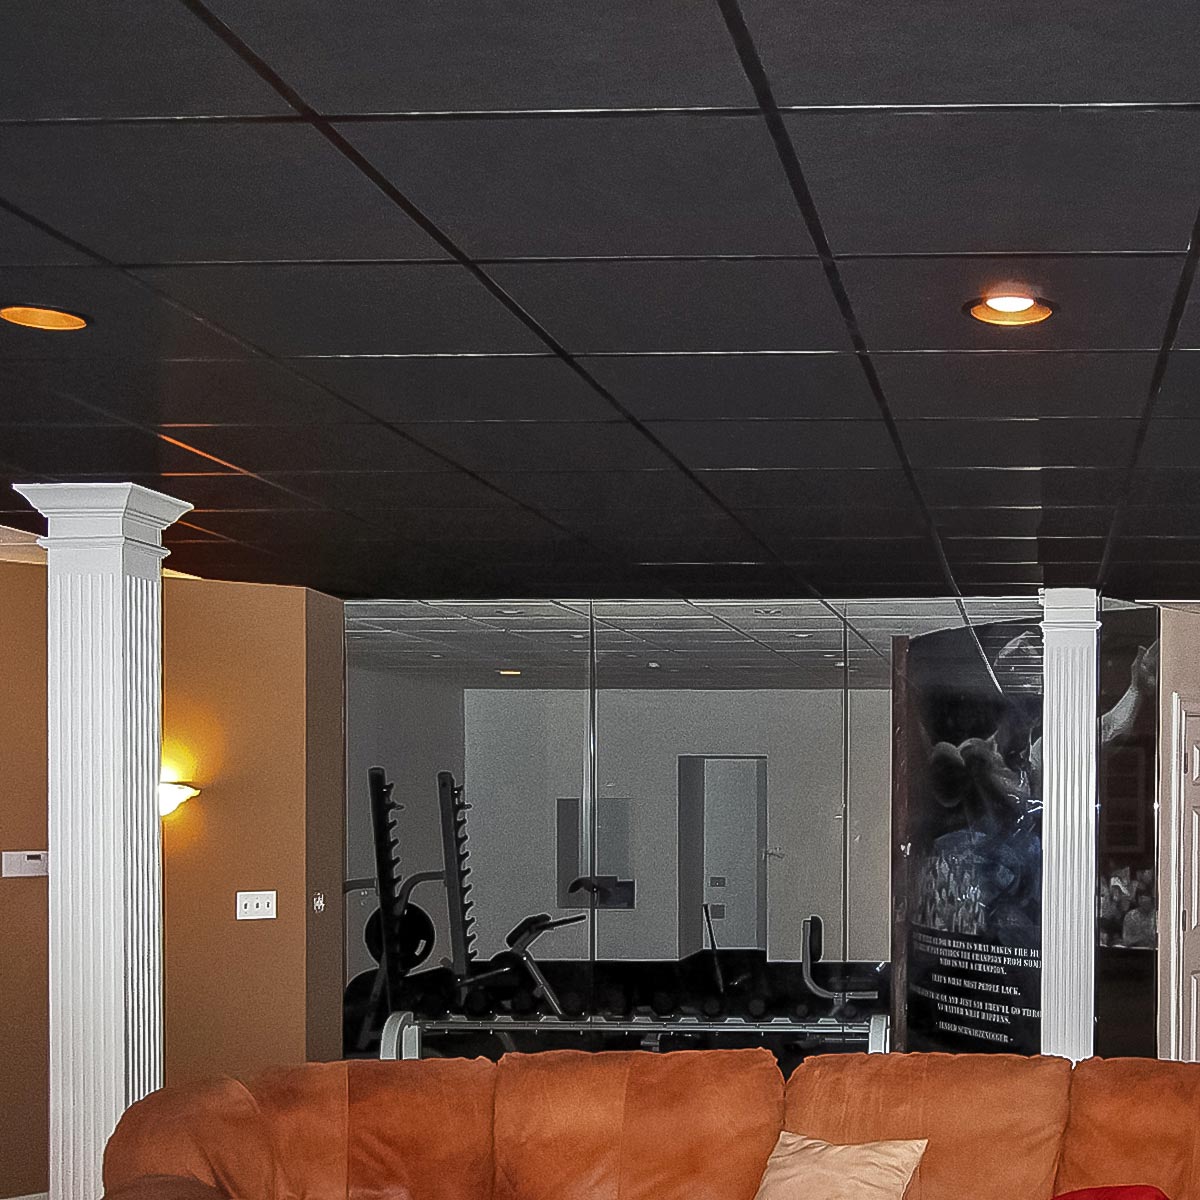 Soundproofing A Ceiling Sound Proofing Basement Remodeling Basement Ceiling